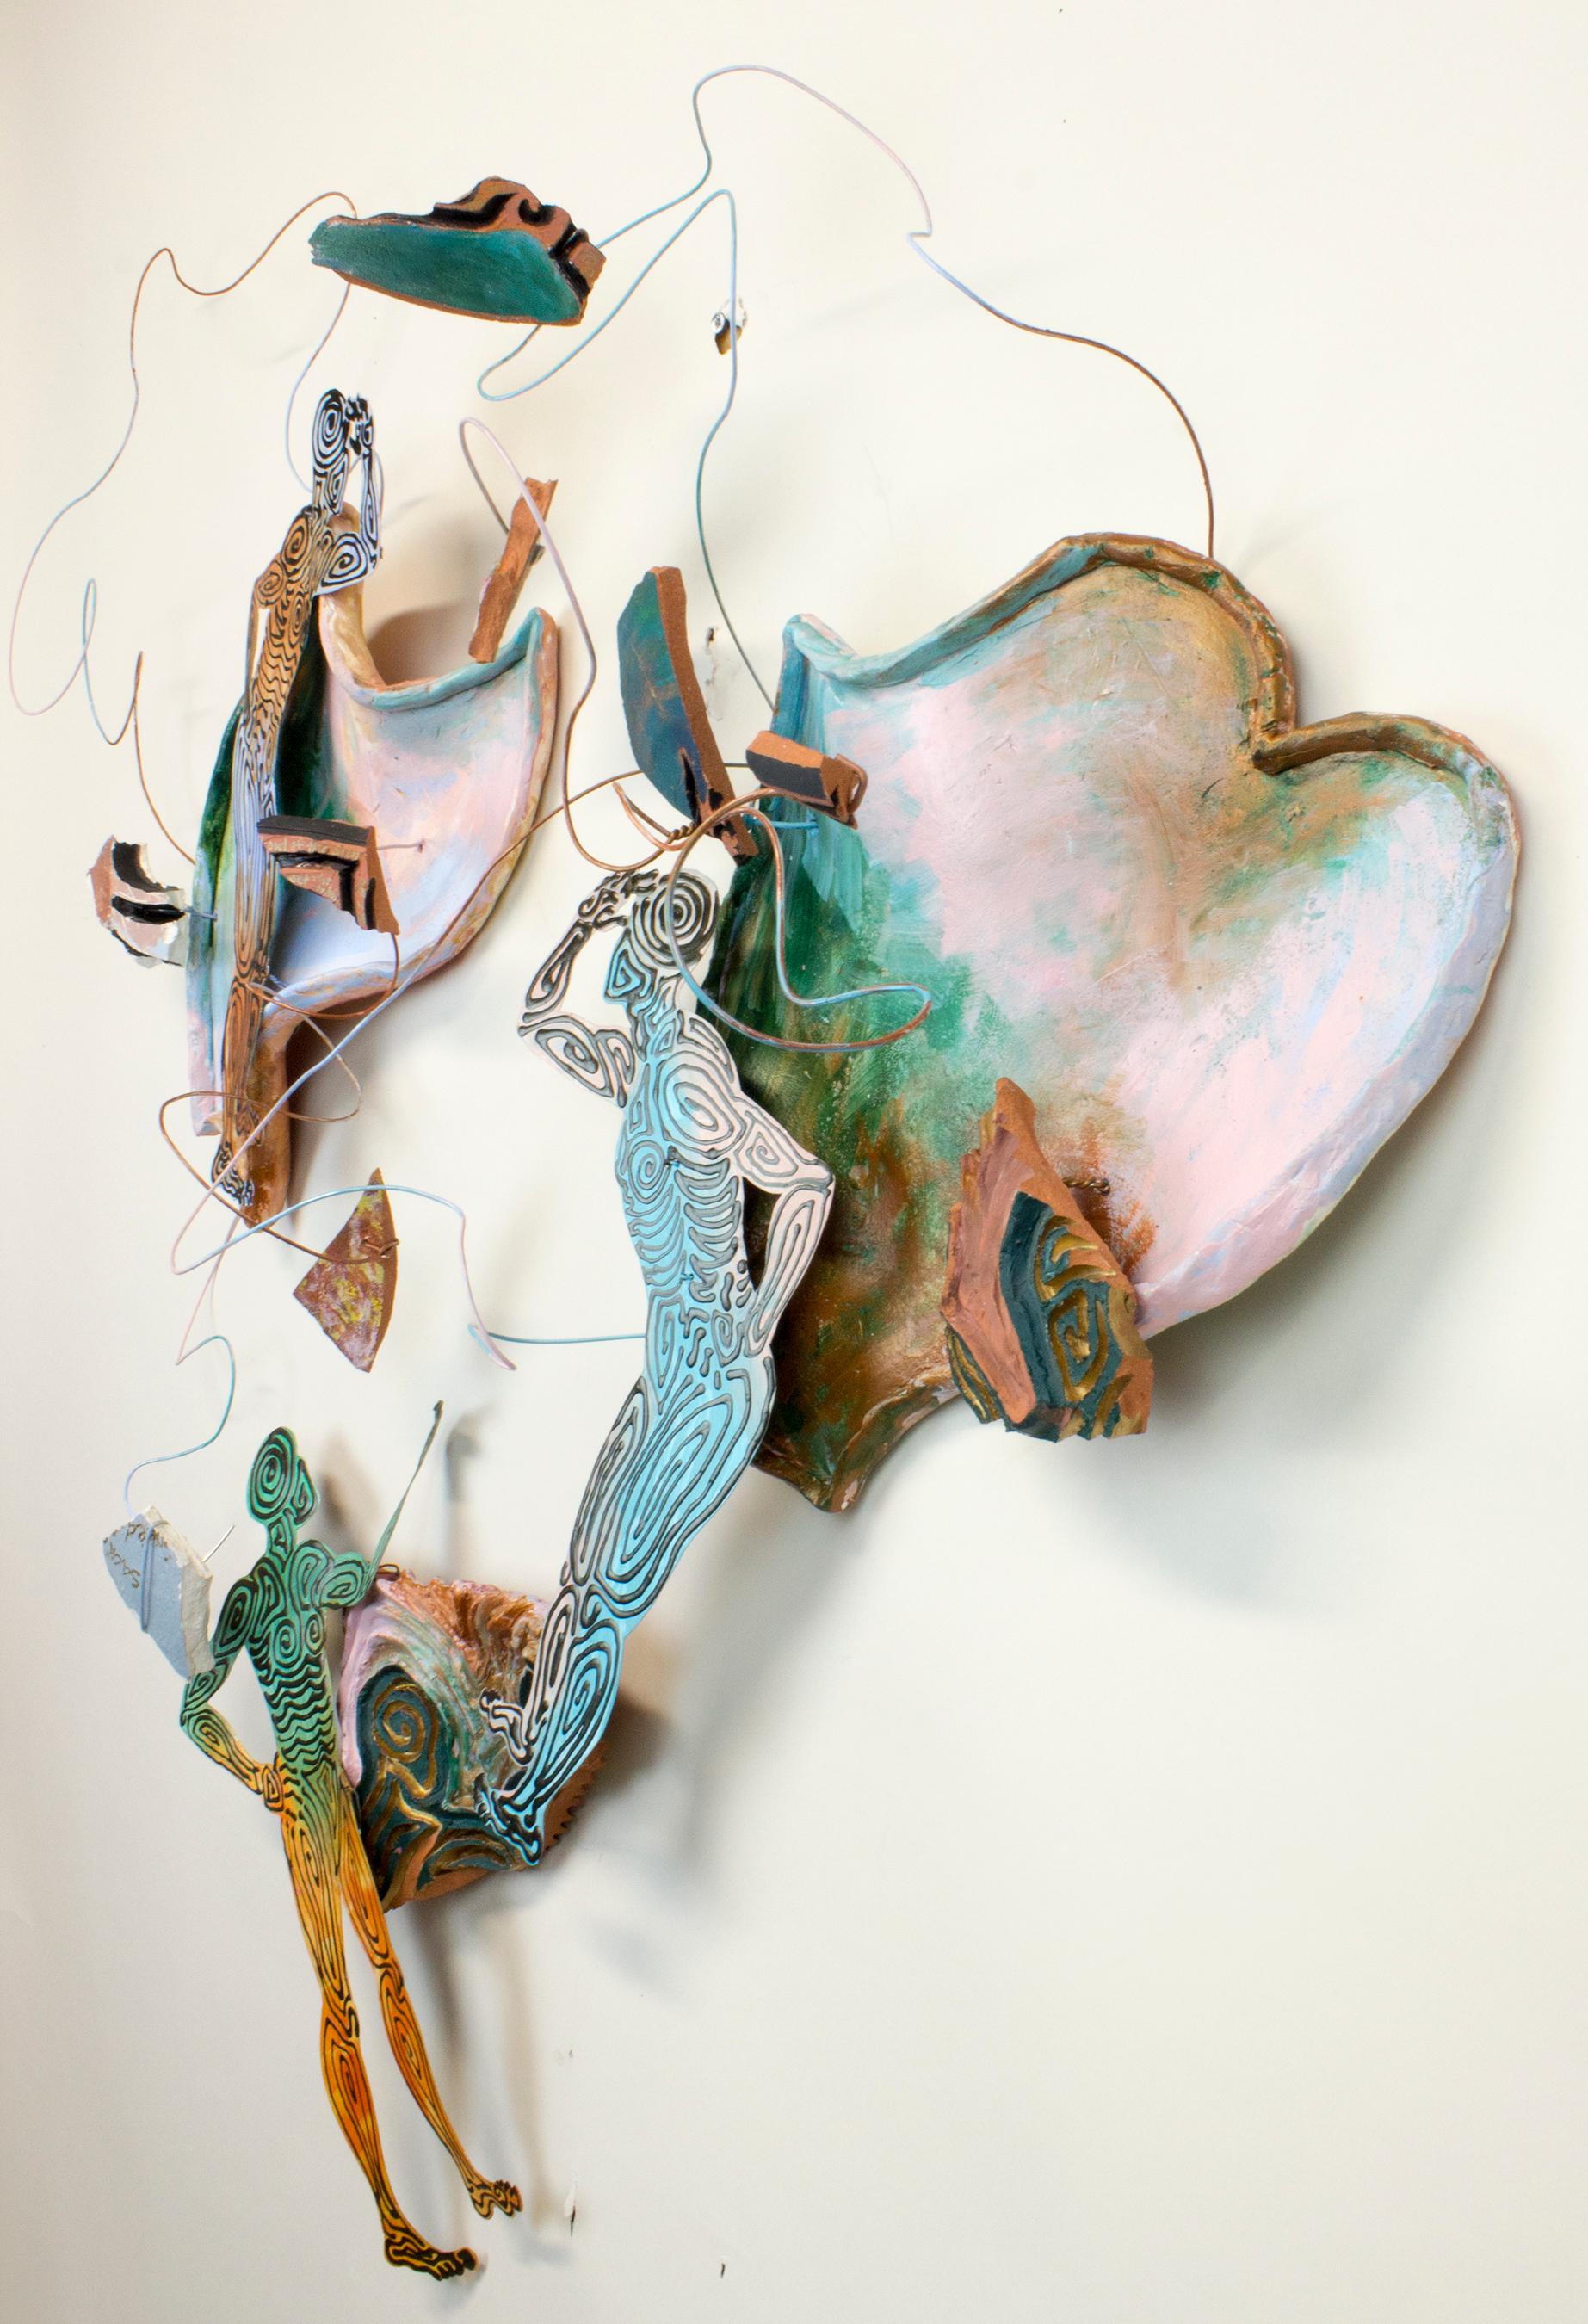 Virginia Mahoney’s “Neither Here nor There” is a 34 x 34 x 8 inch 3-piece ceramic and metal wall sculpture in green, pink, blue, black, green, orange, and brown. Three cutout figures in multicolor and black painted metal interact with shards, wire